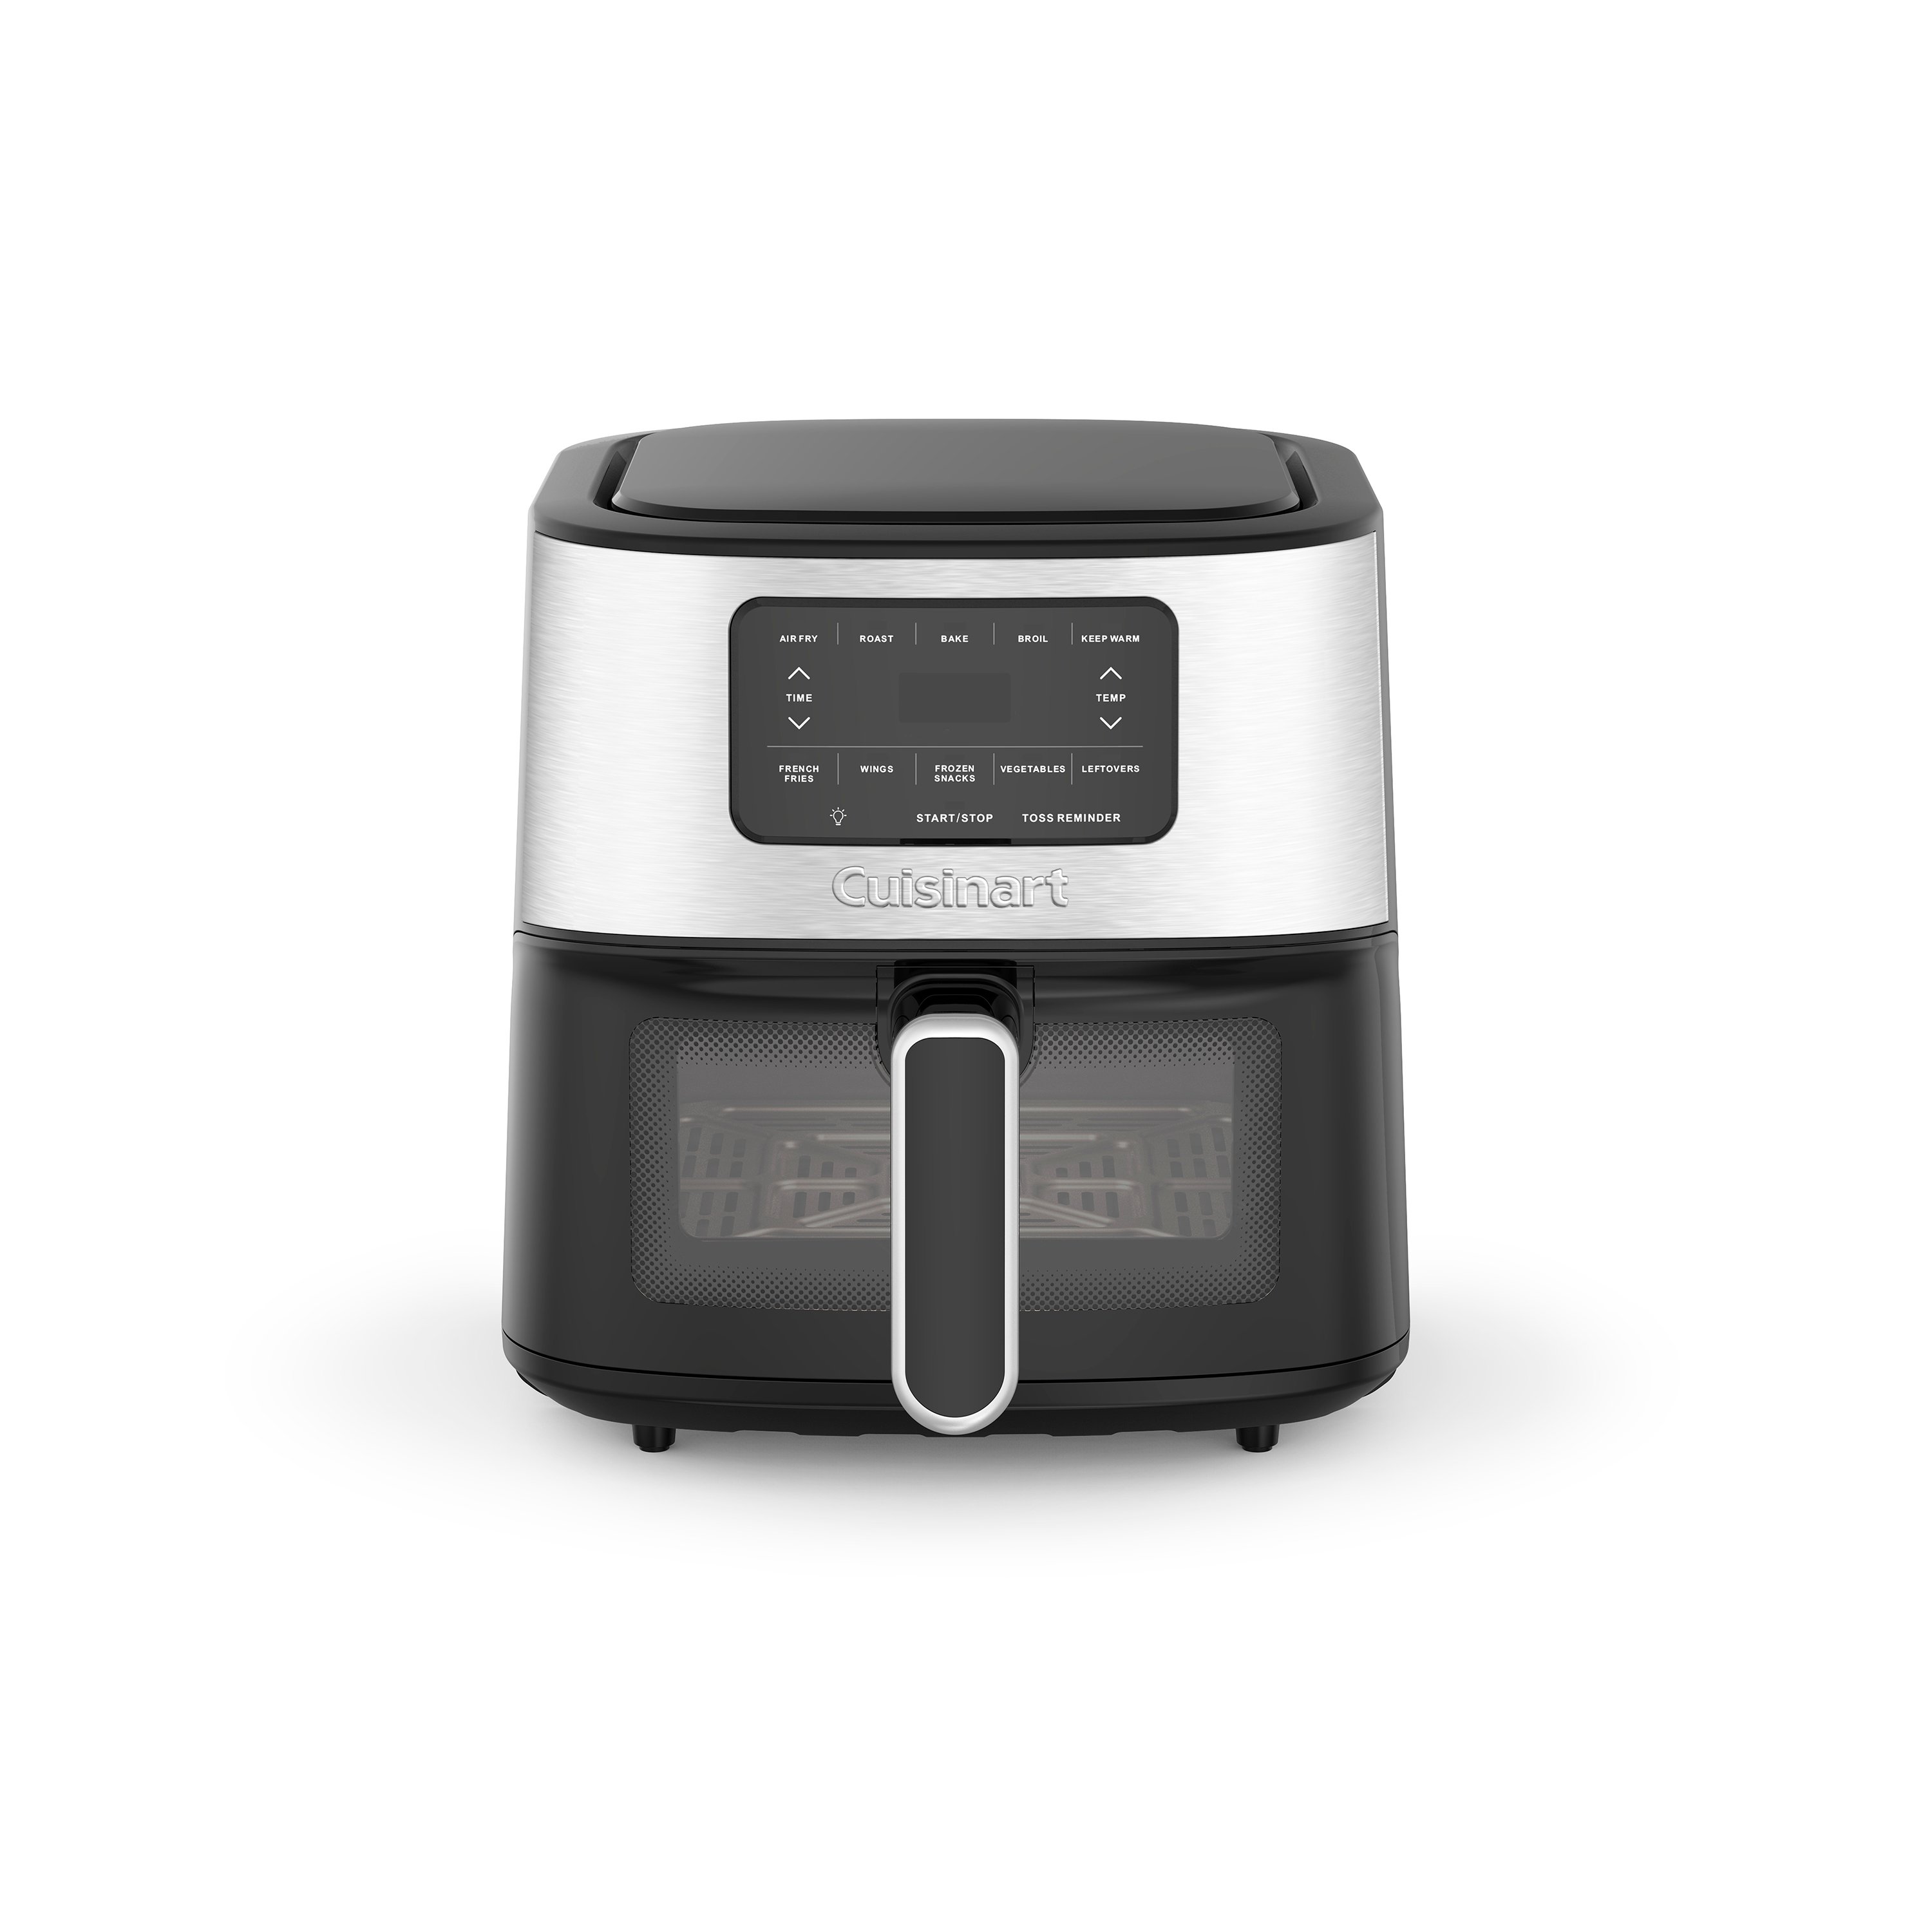 Gourmia Introduces Award Winning Smart Kitchen Tea and Coffee Makers